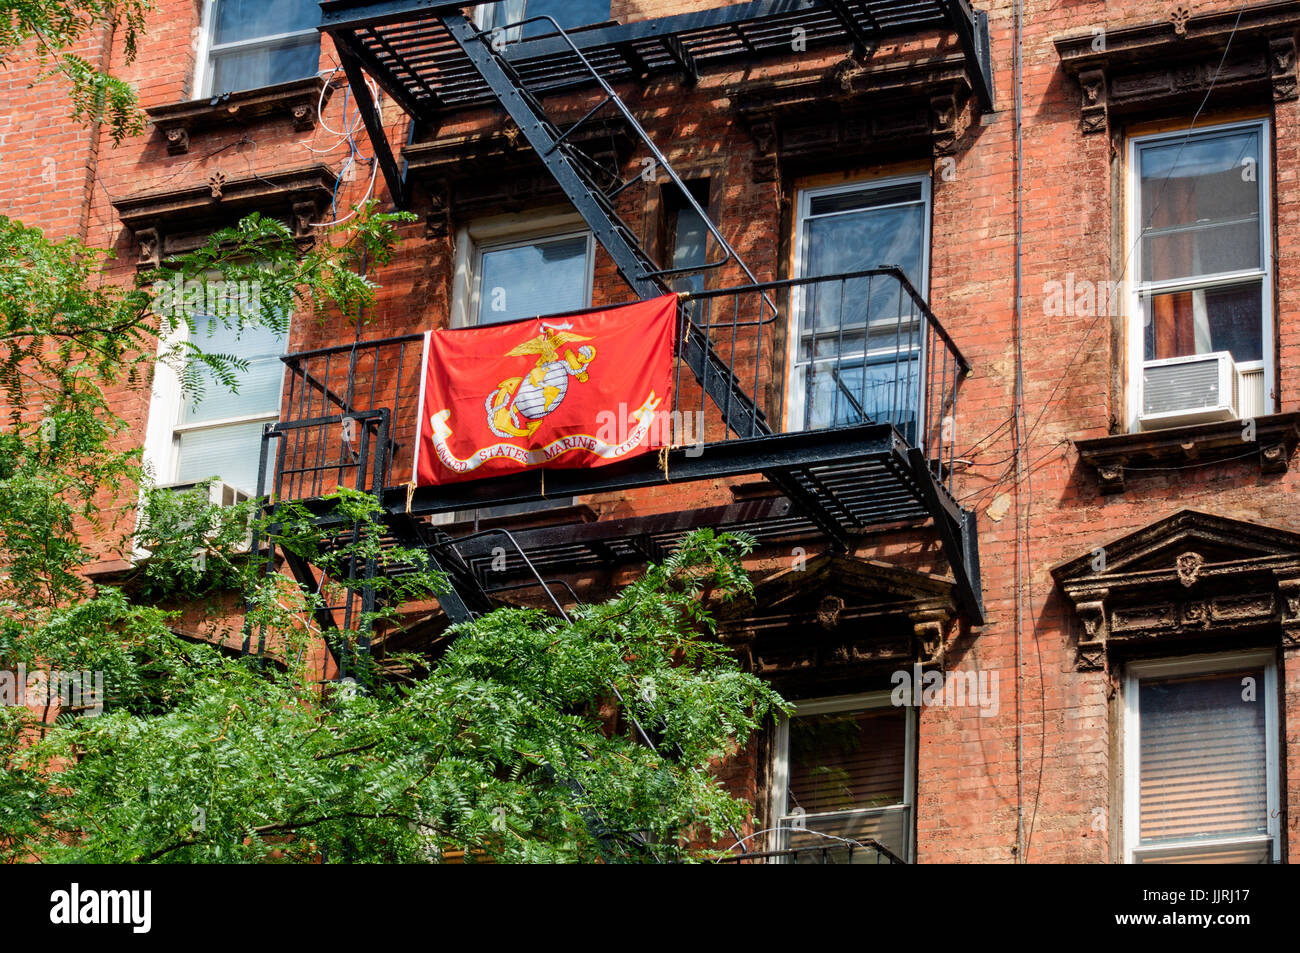 Red, gold and white United States Marine Corps flag on a fire escape in a Lower Manhattan tenement building in New York City Stock Photo